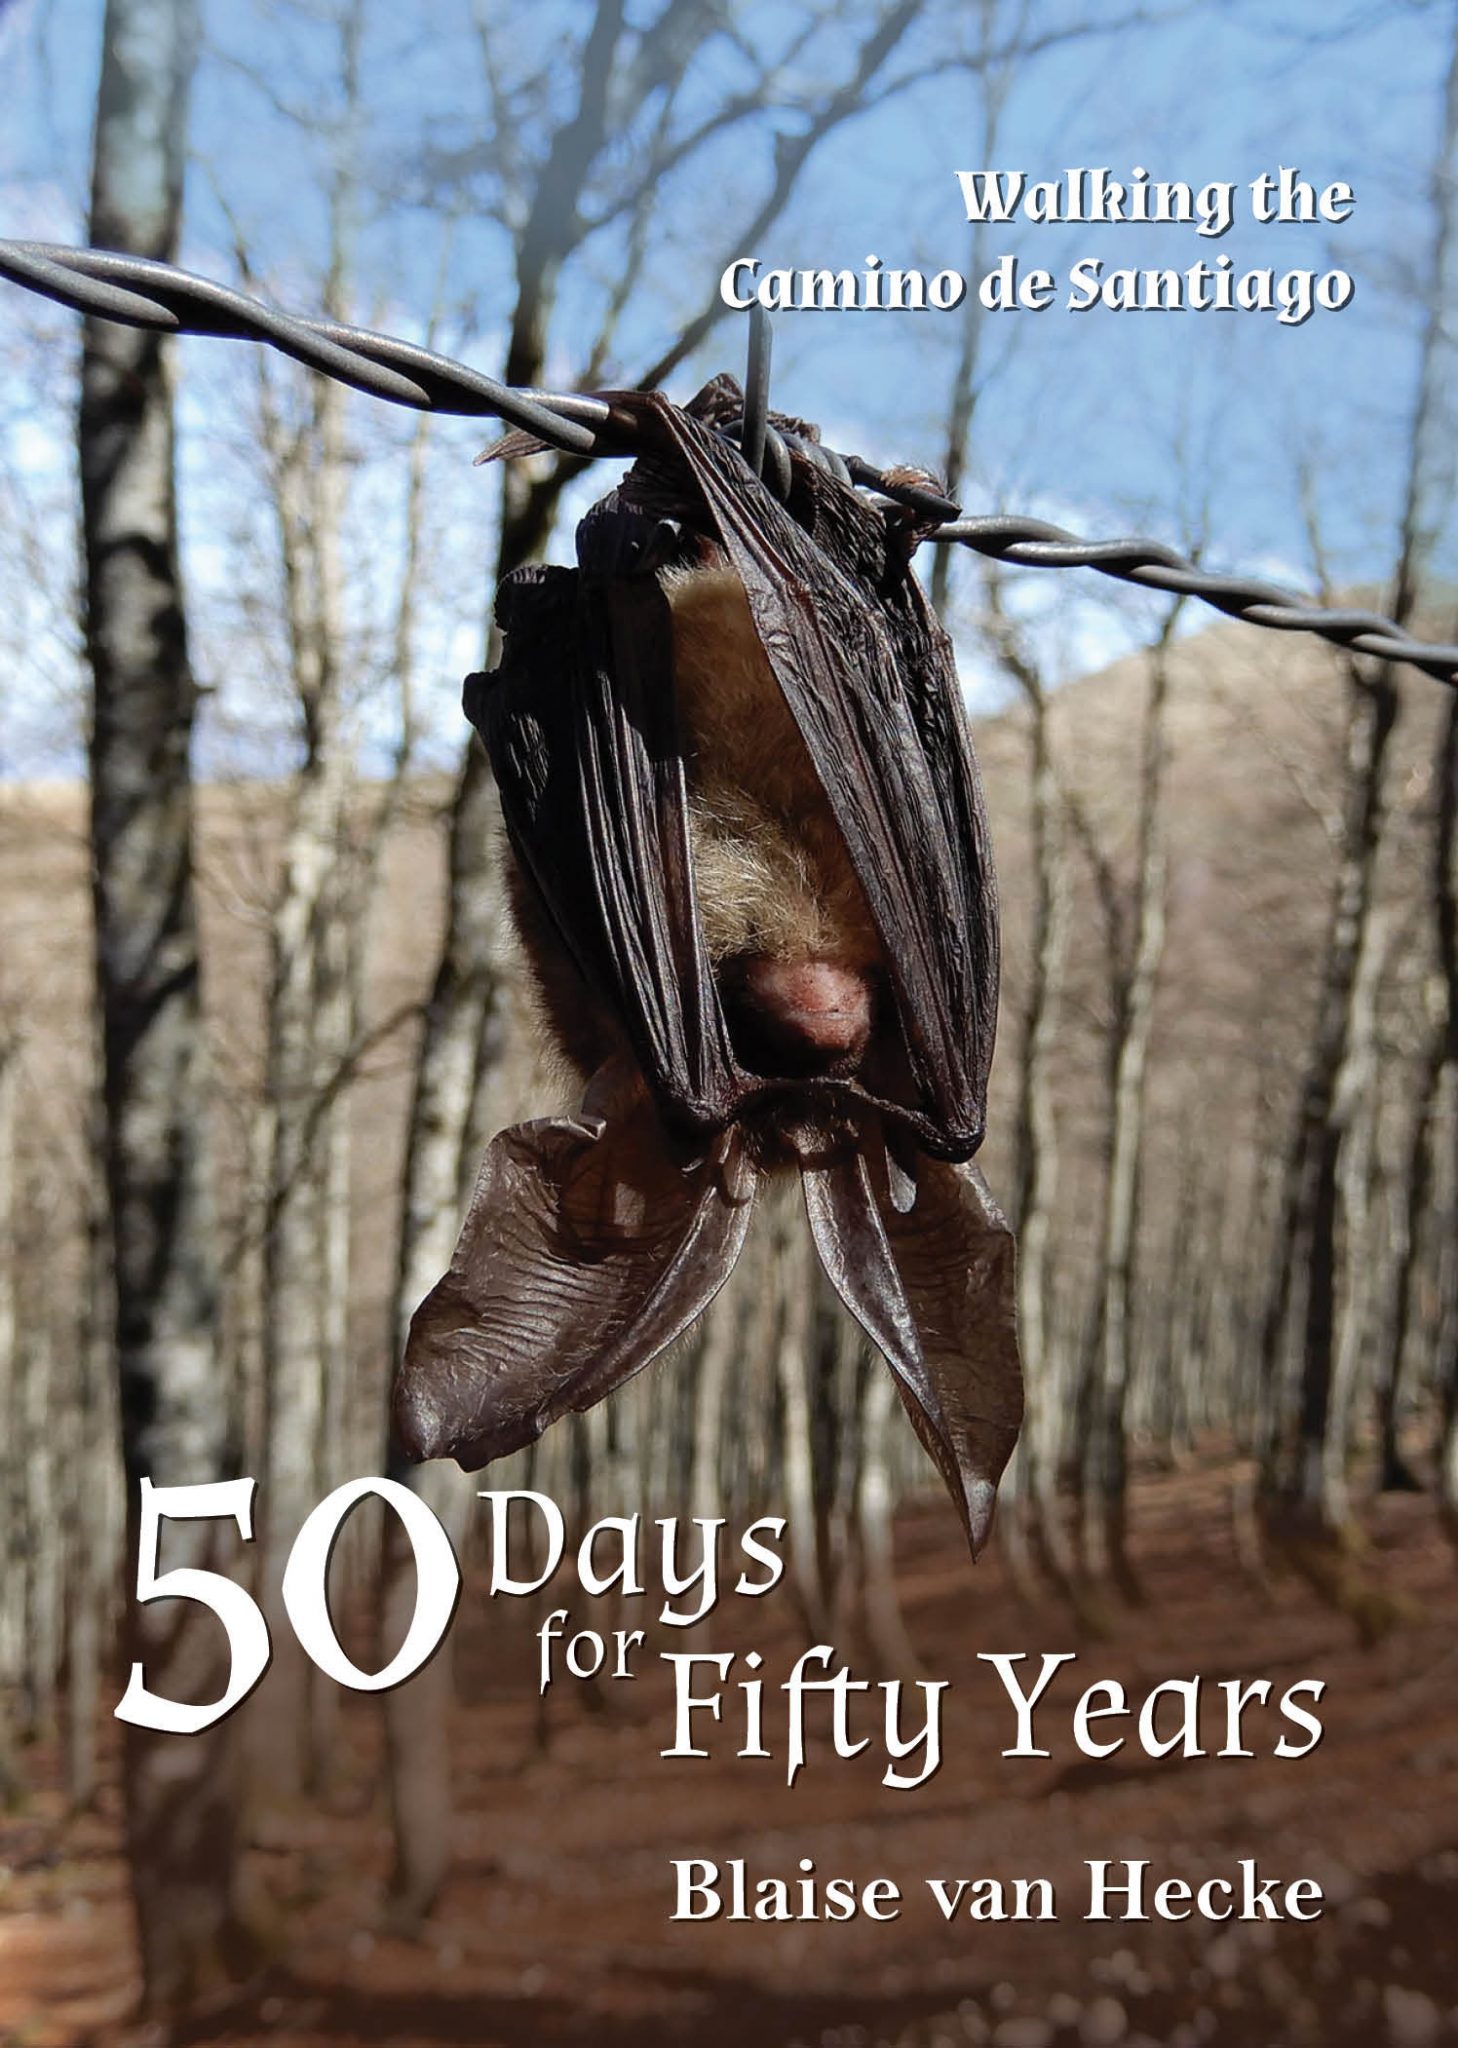 50 Days for Fifty Years